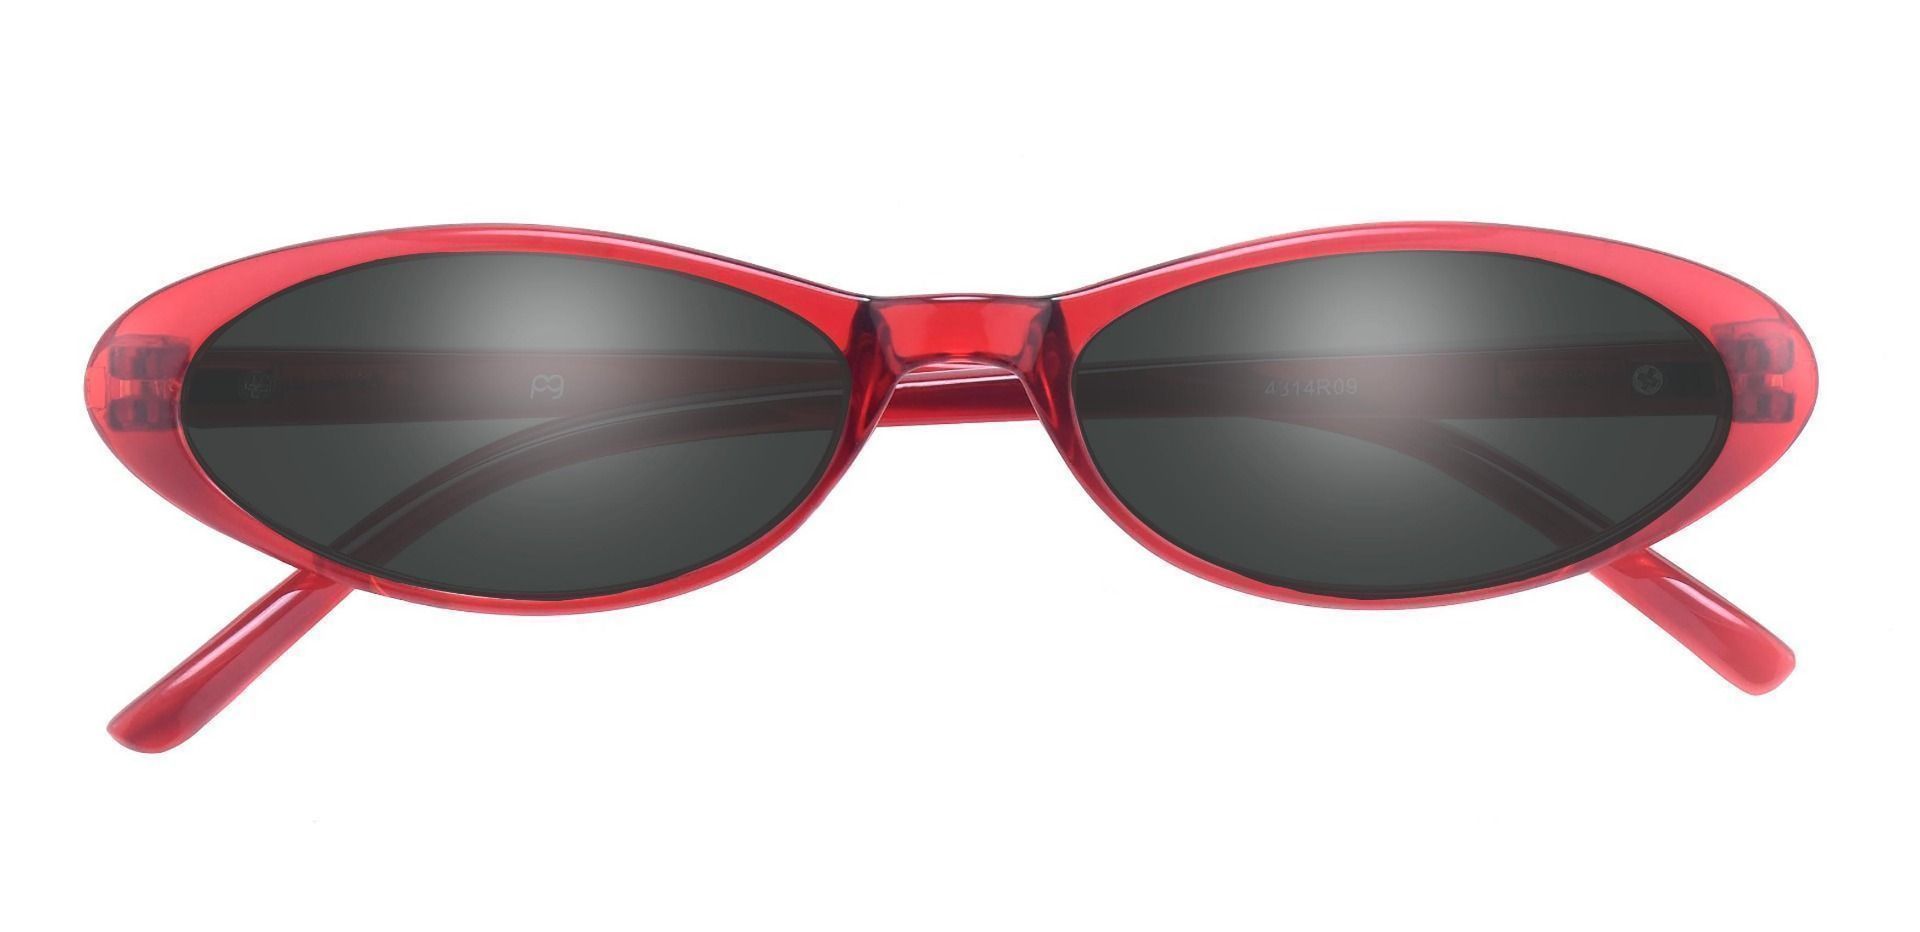 Darcie Oval Single Vision Sunglasses -  Red Frame With Gray Lenses